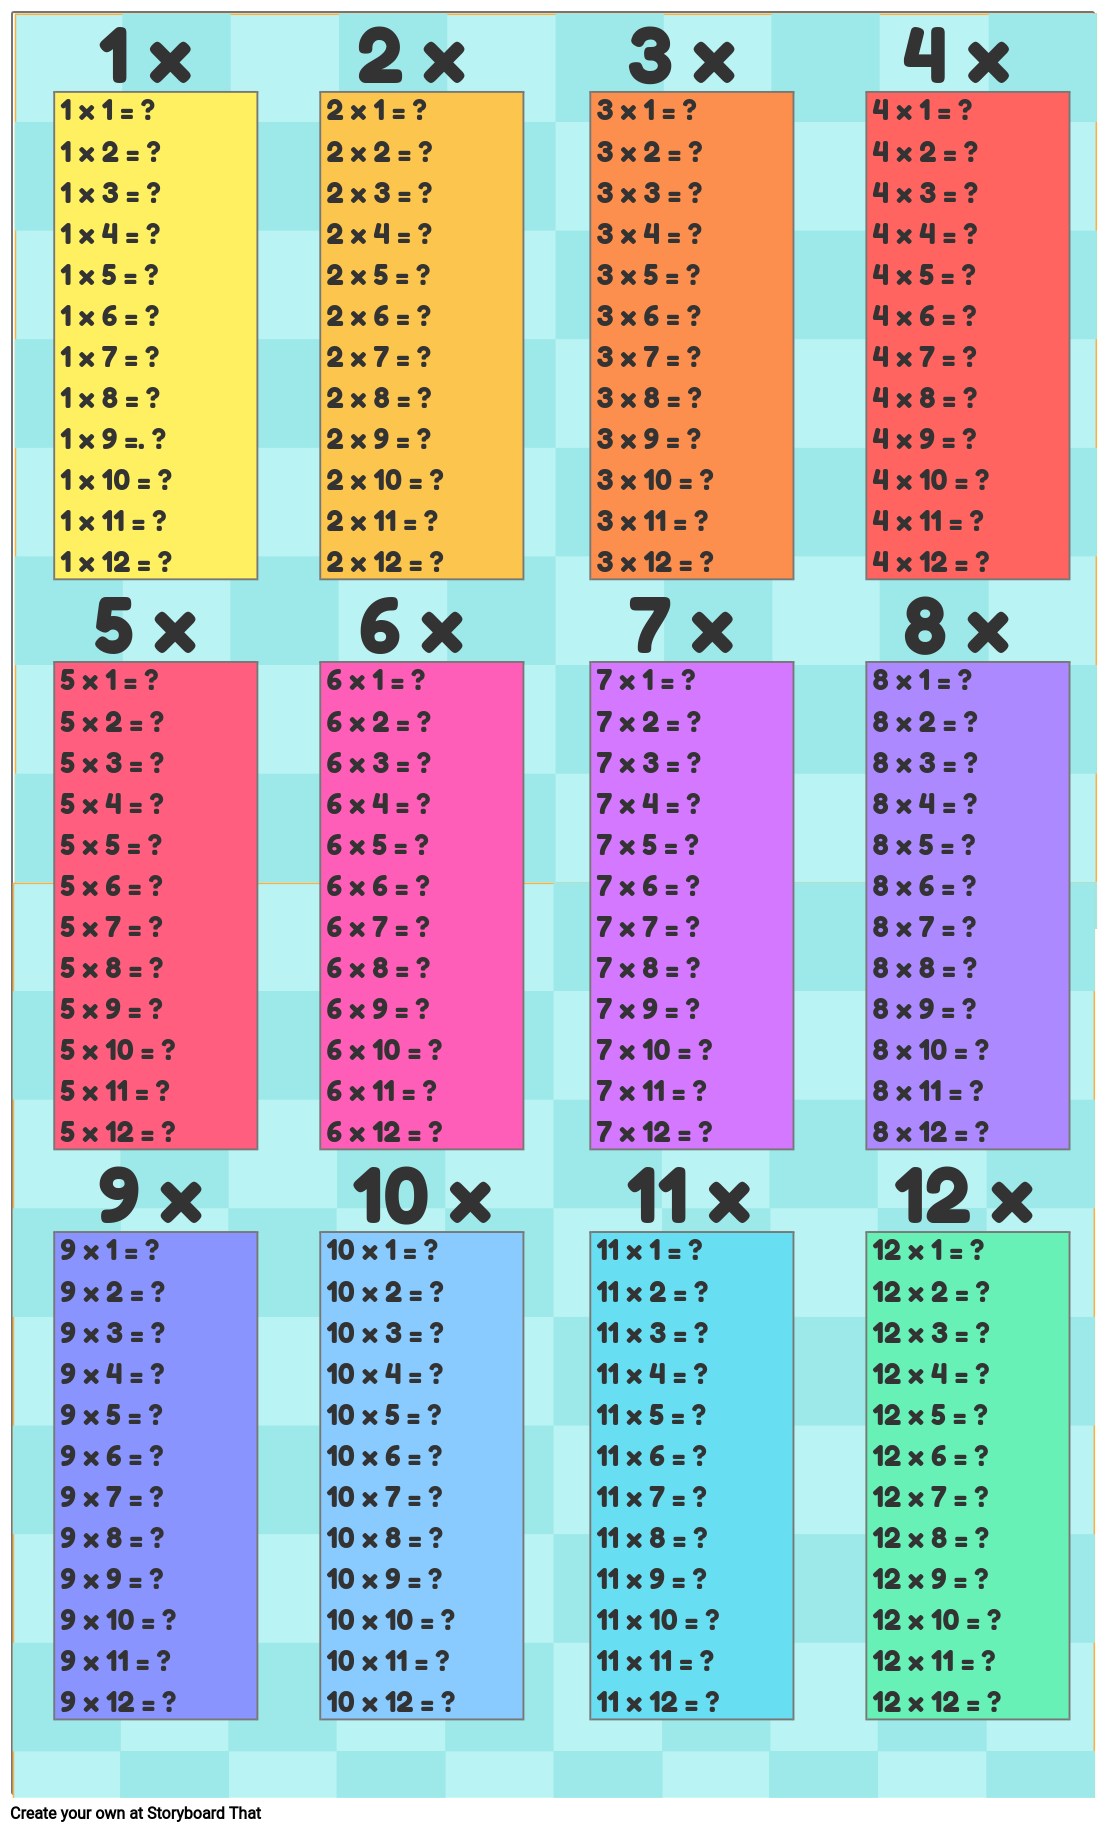 Multiplication Table Template 2